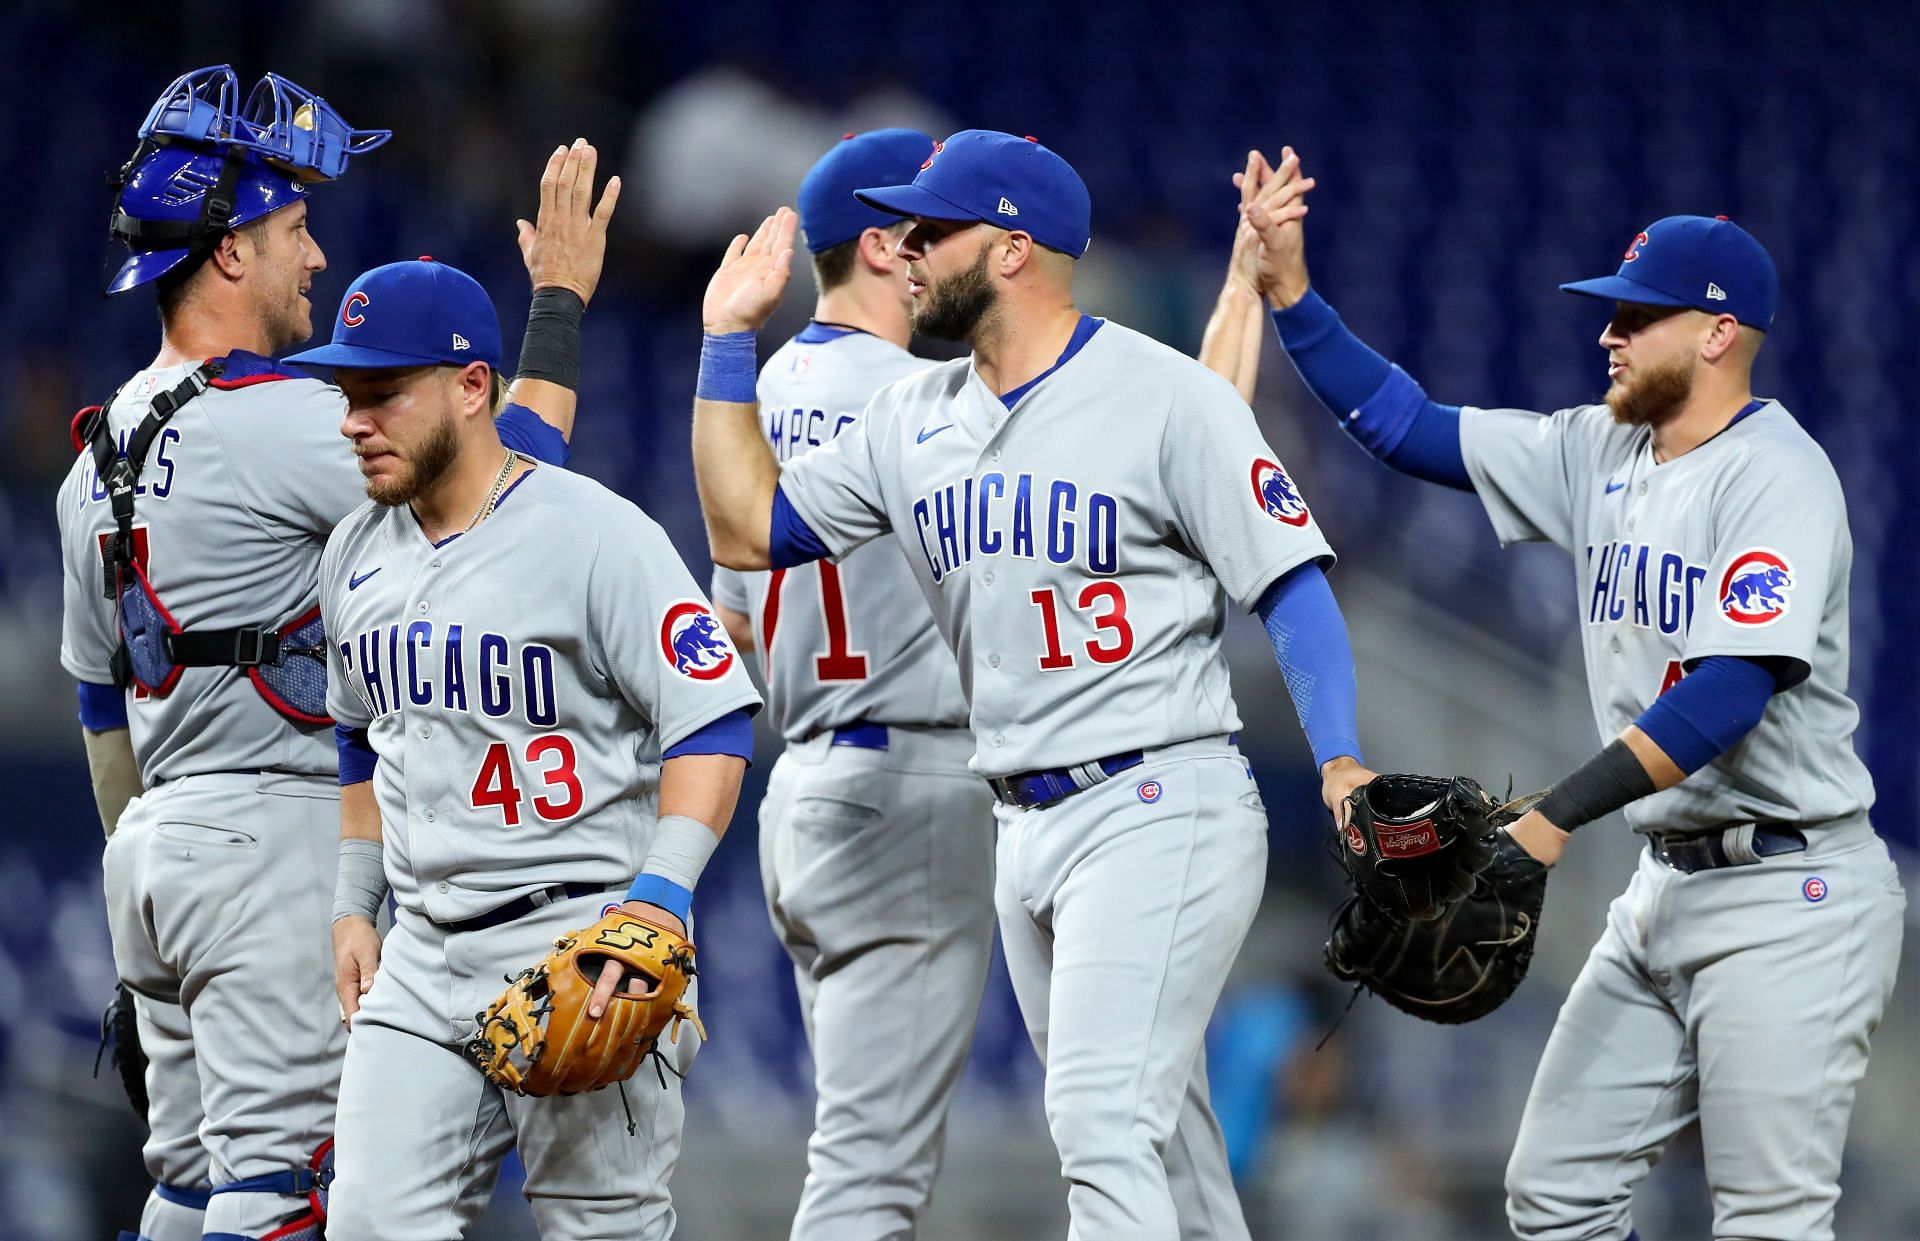 The Chicago Cubs, following their series win against the Marlins.